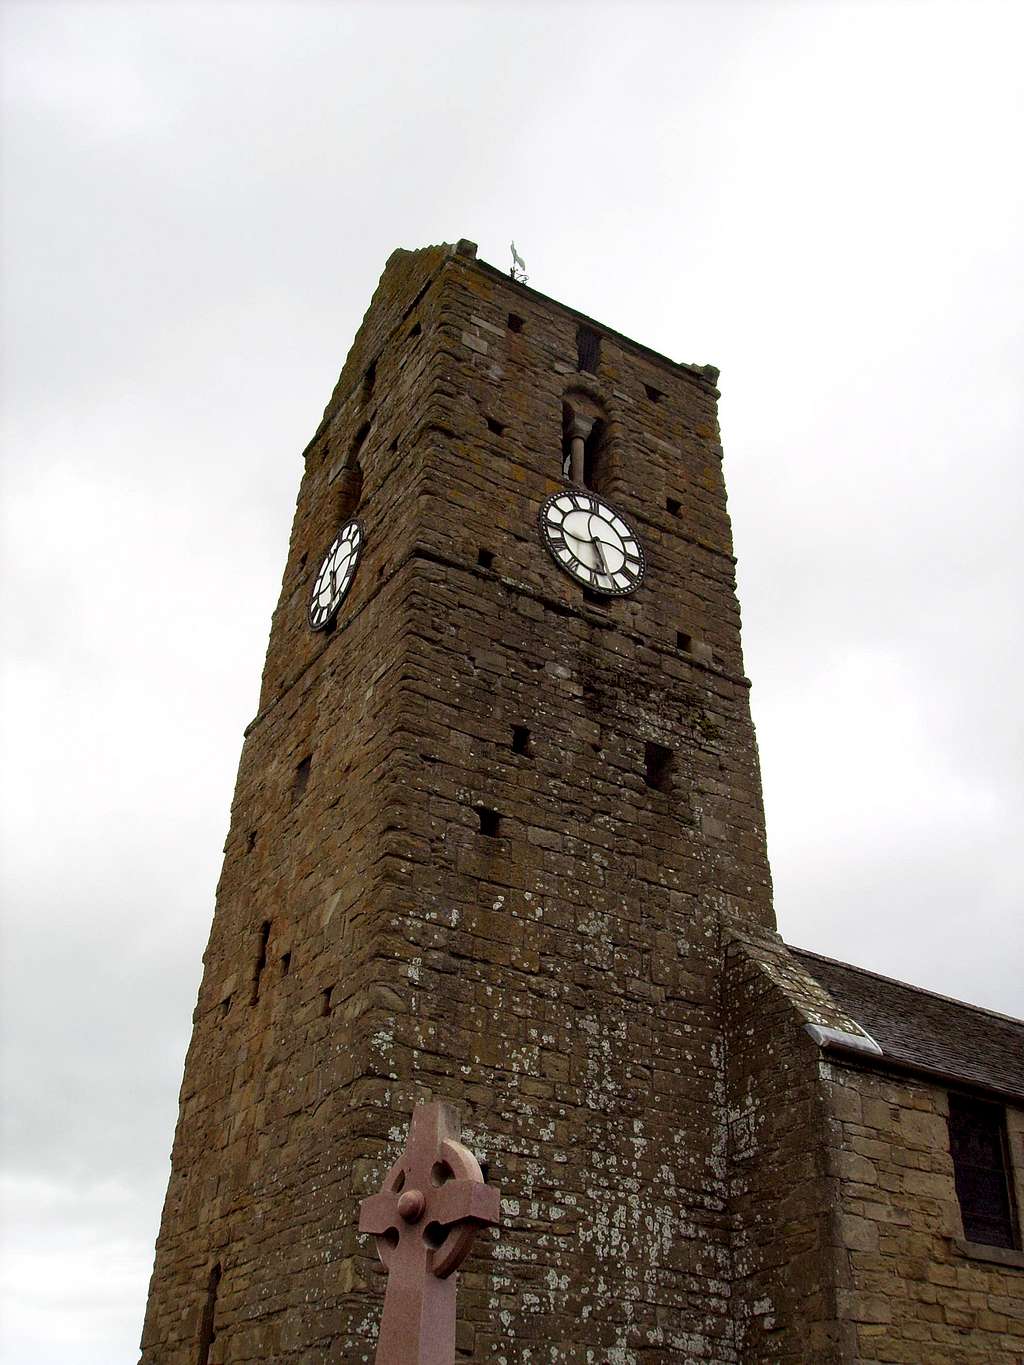 St Serf's Tower